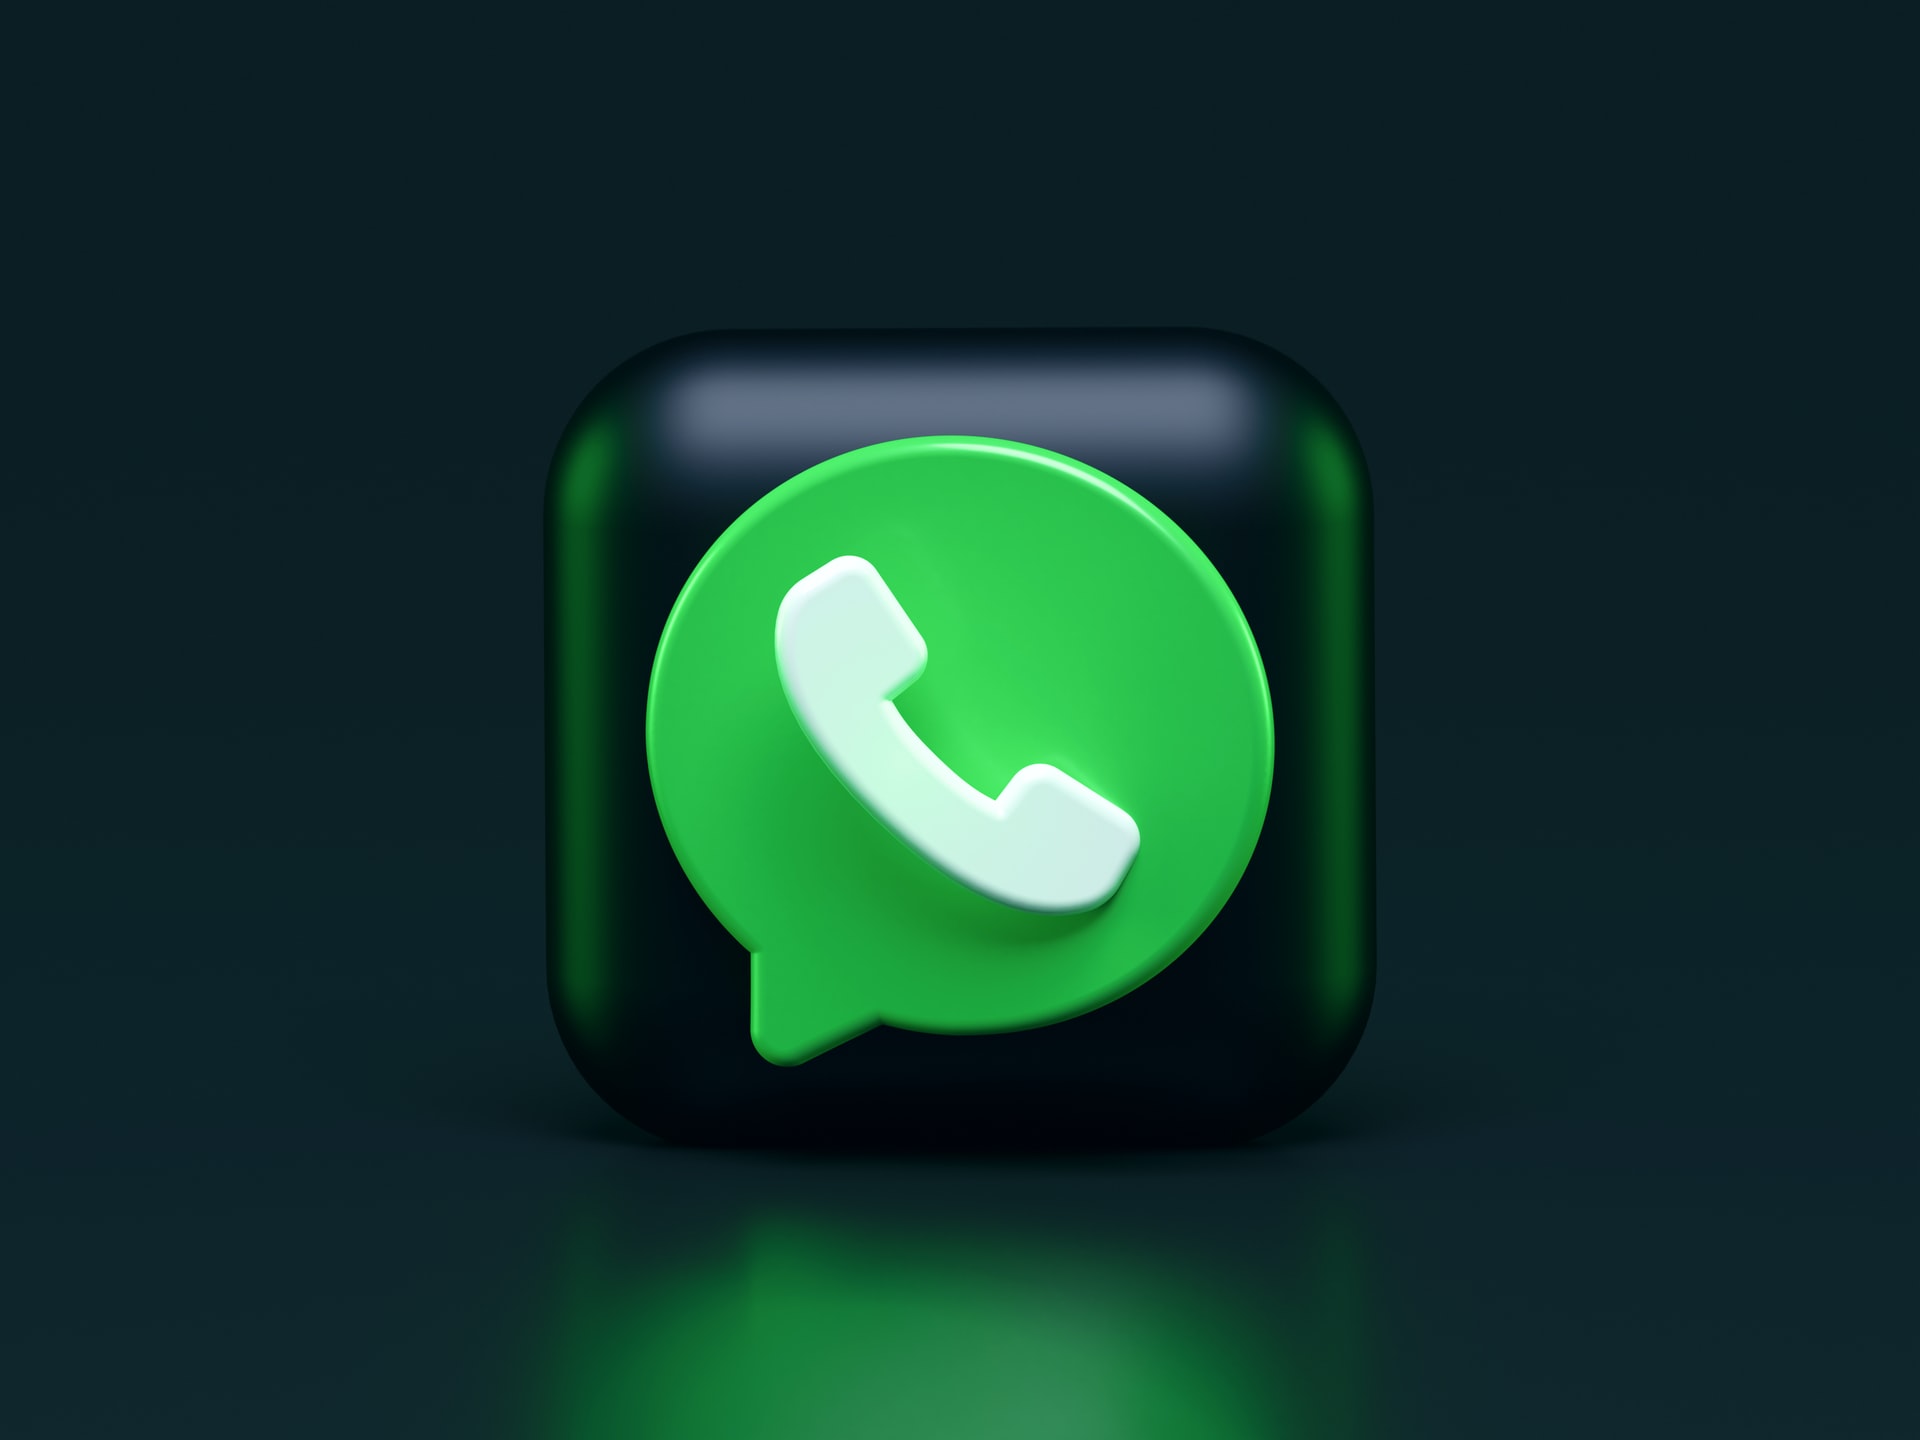 Whatsapp logo for the article Time’s up for “GB Whatsapp” clone users as Whatsapp threatens block